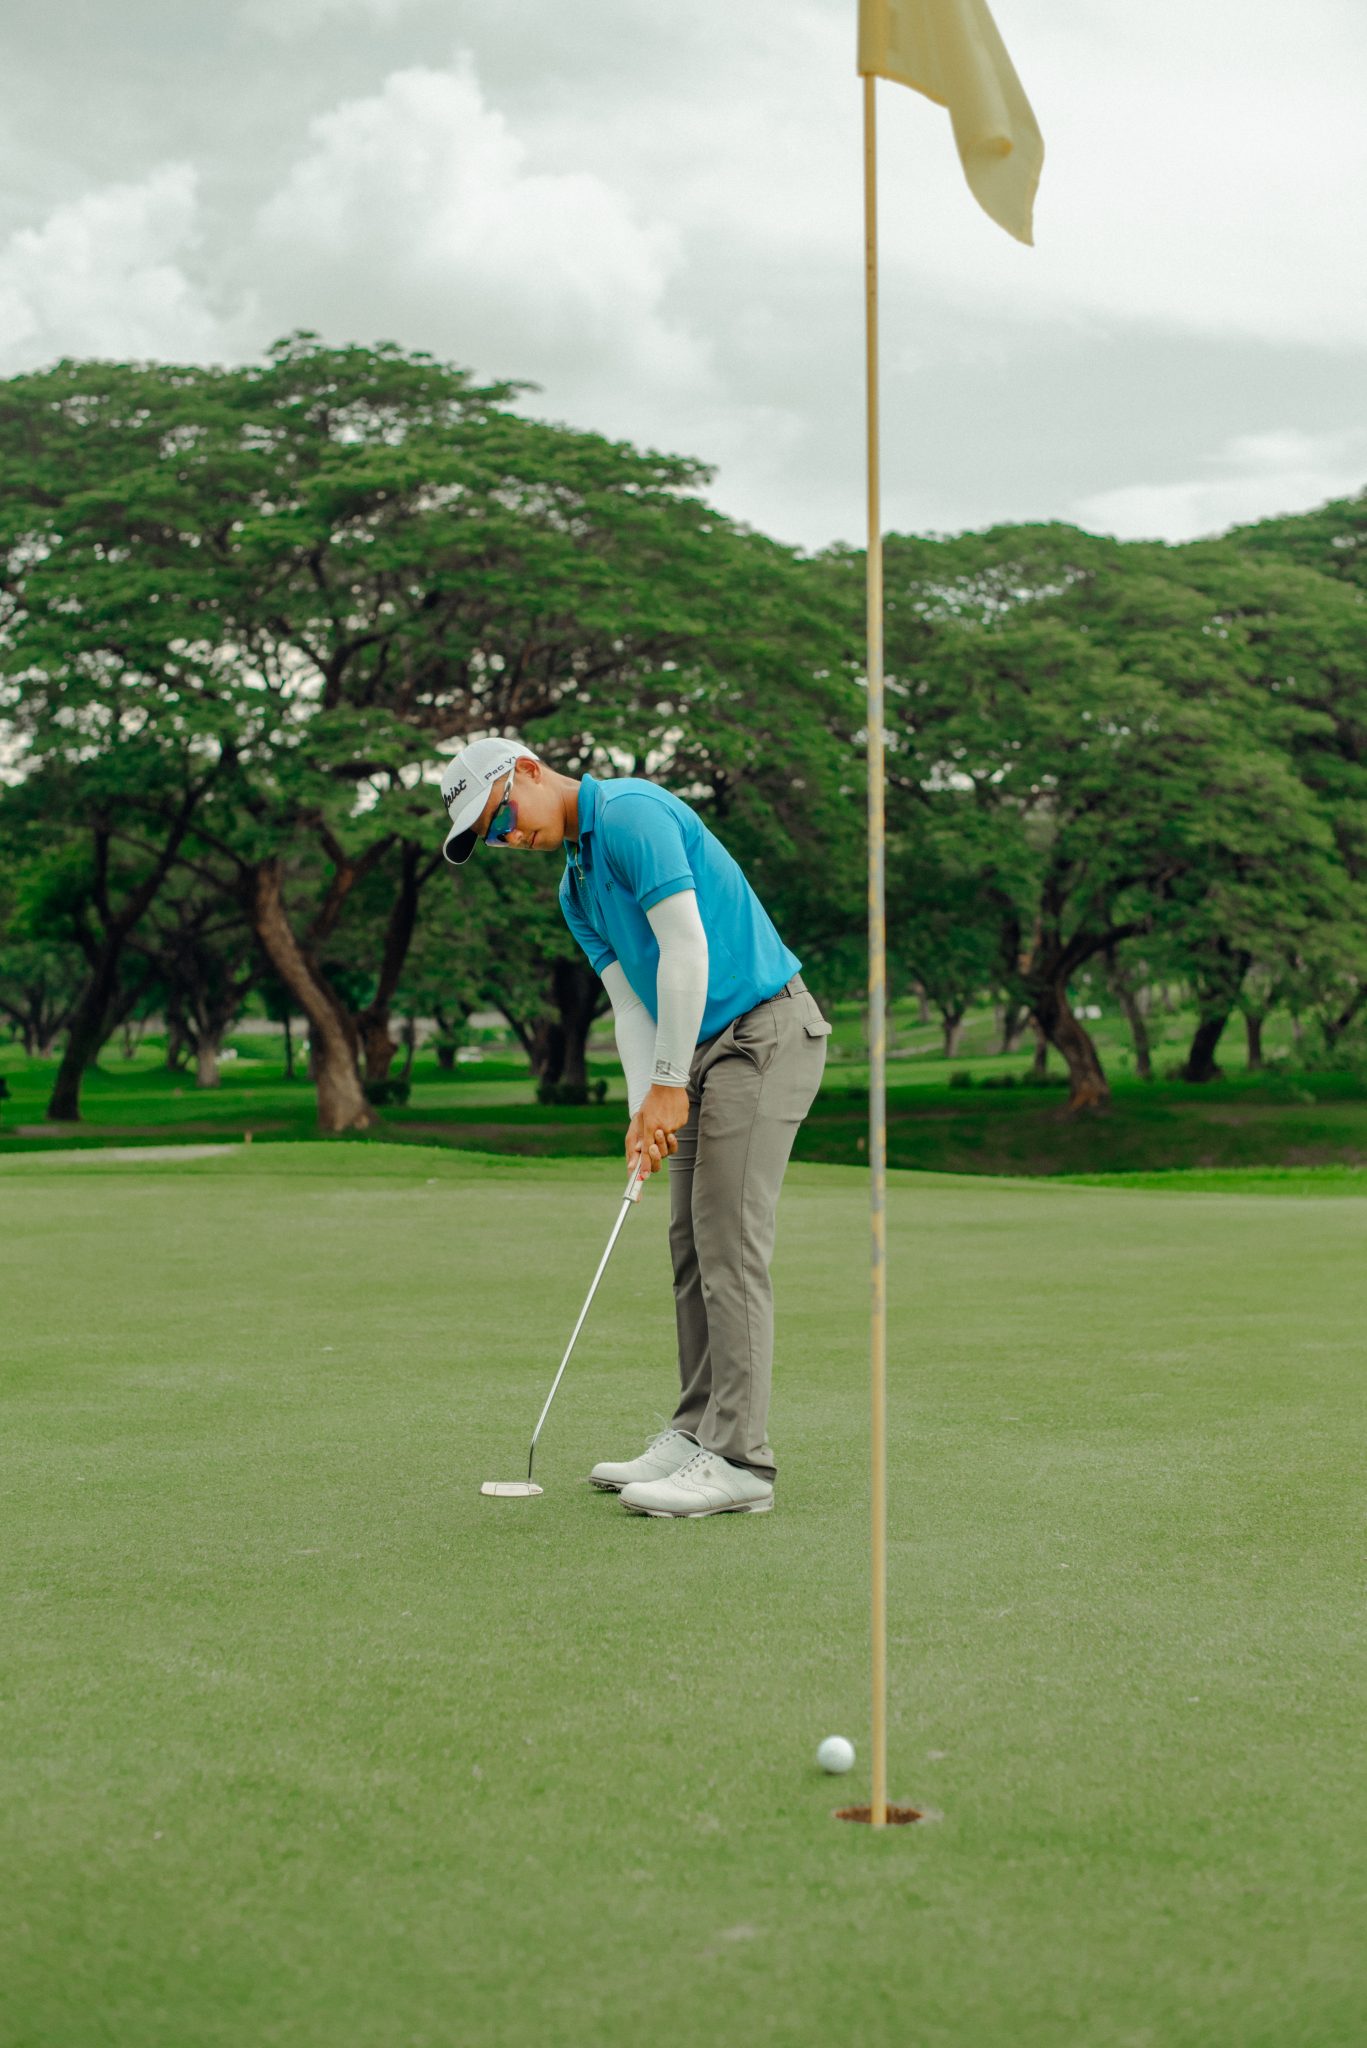 Aidric Chan also bagged first place in the 2017 Northern Luzon Regional Golf Championship and the 2018 Riviera MVPSF Amateur Golf Championship